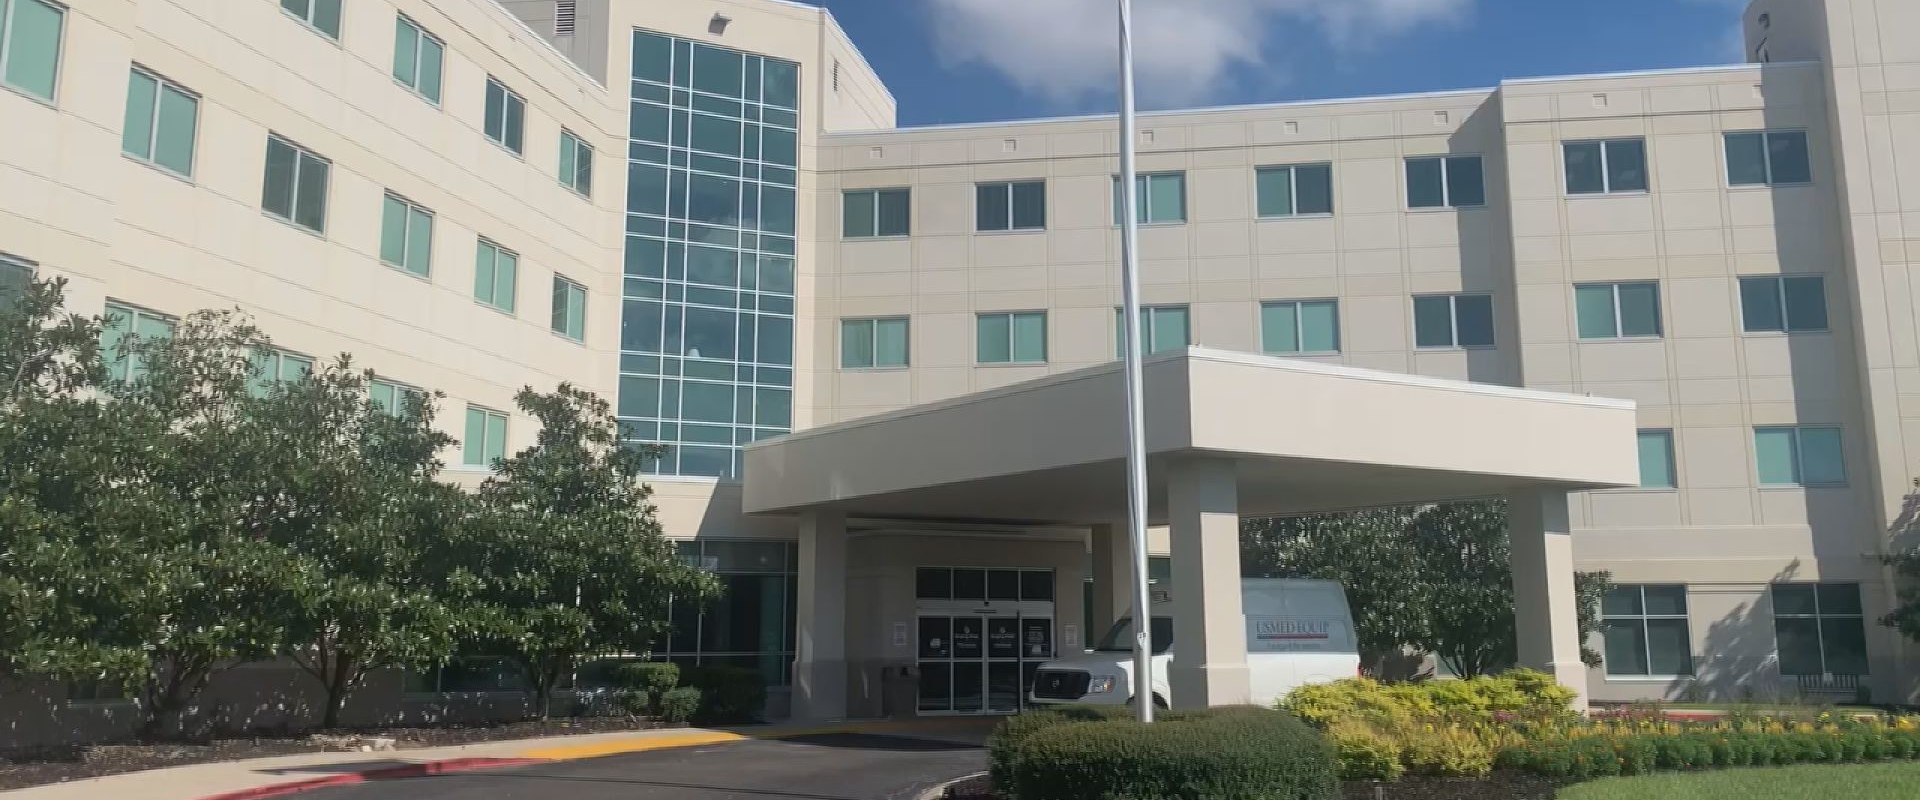 The Best Hospitals in Gulfport, MS: Providing Quality Healthcare to the Community